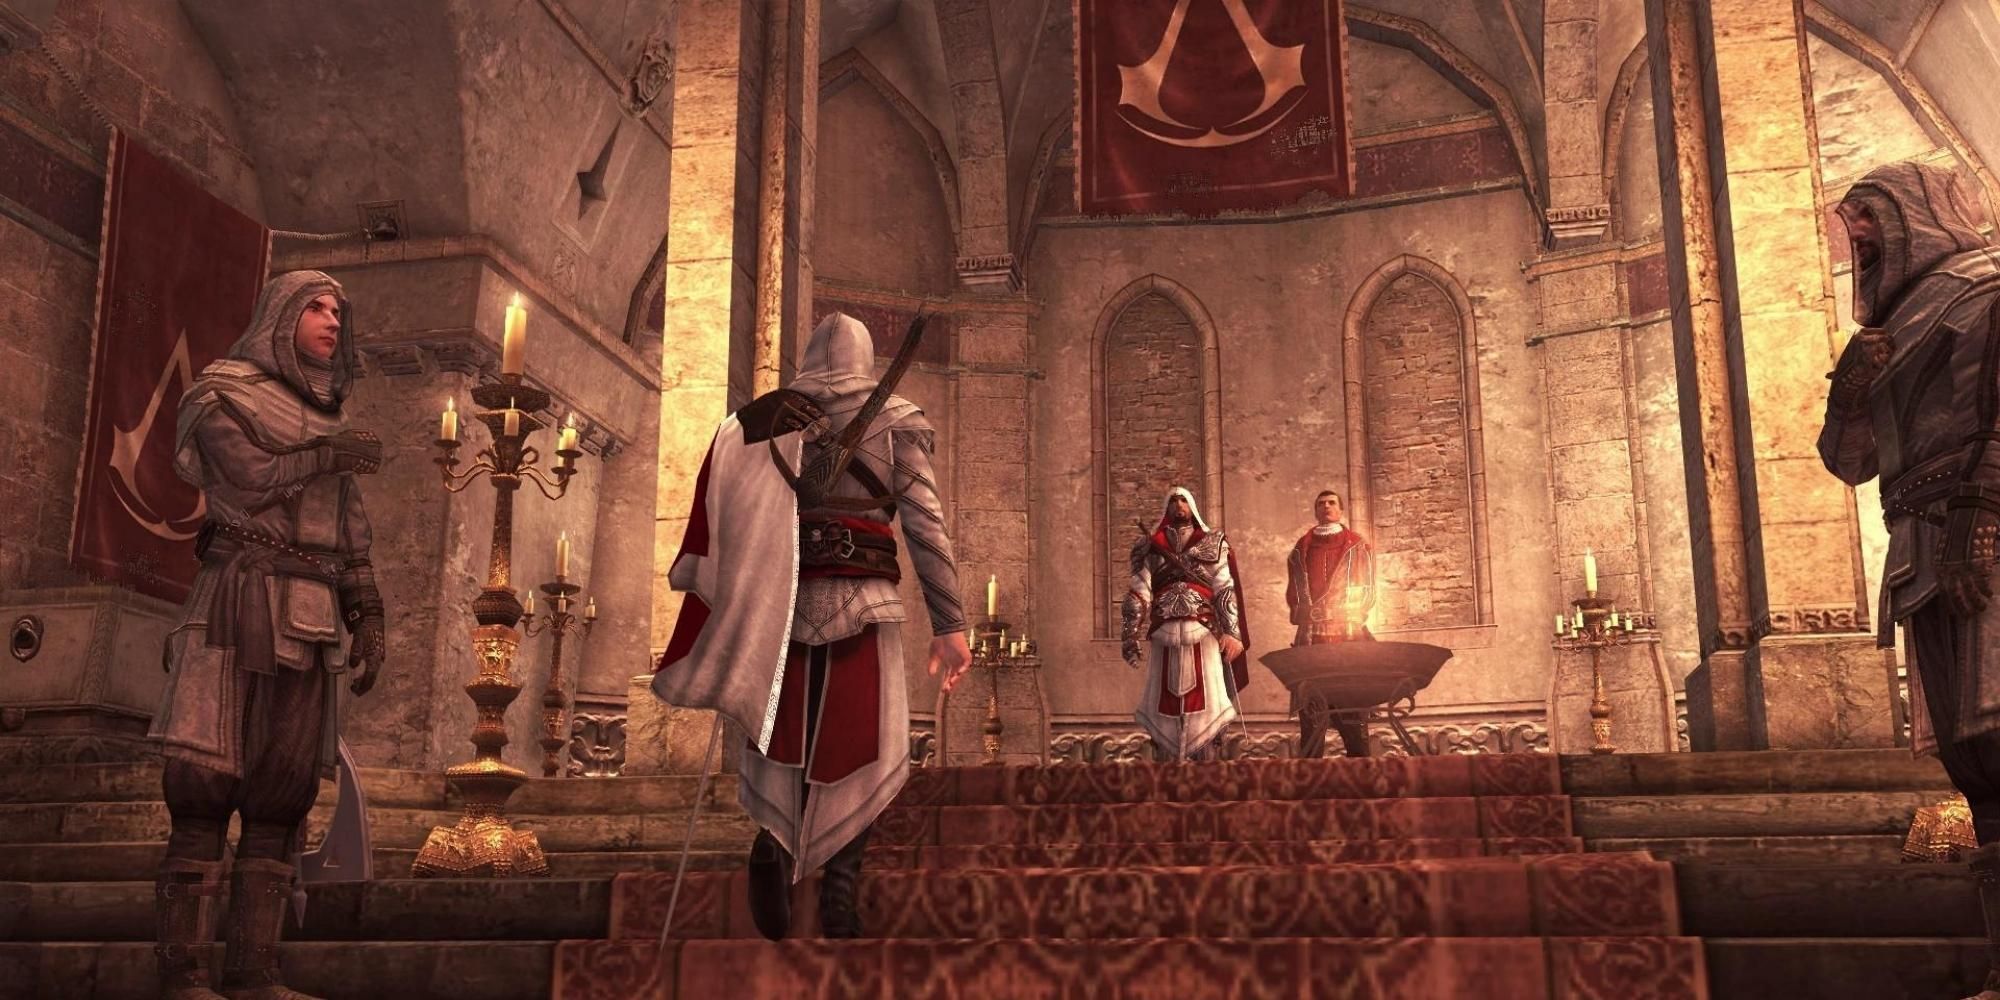 members of The Assassin Order in Assassin’s Creed